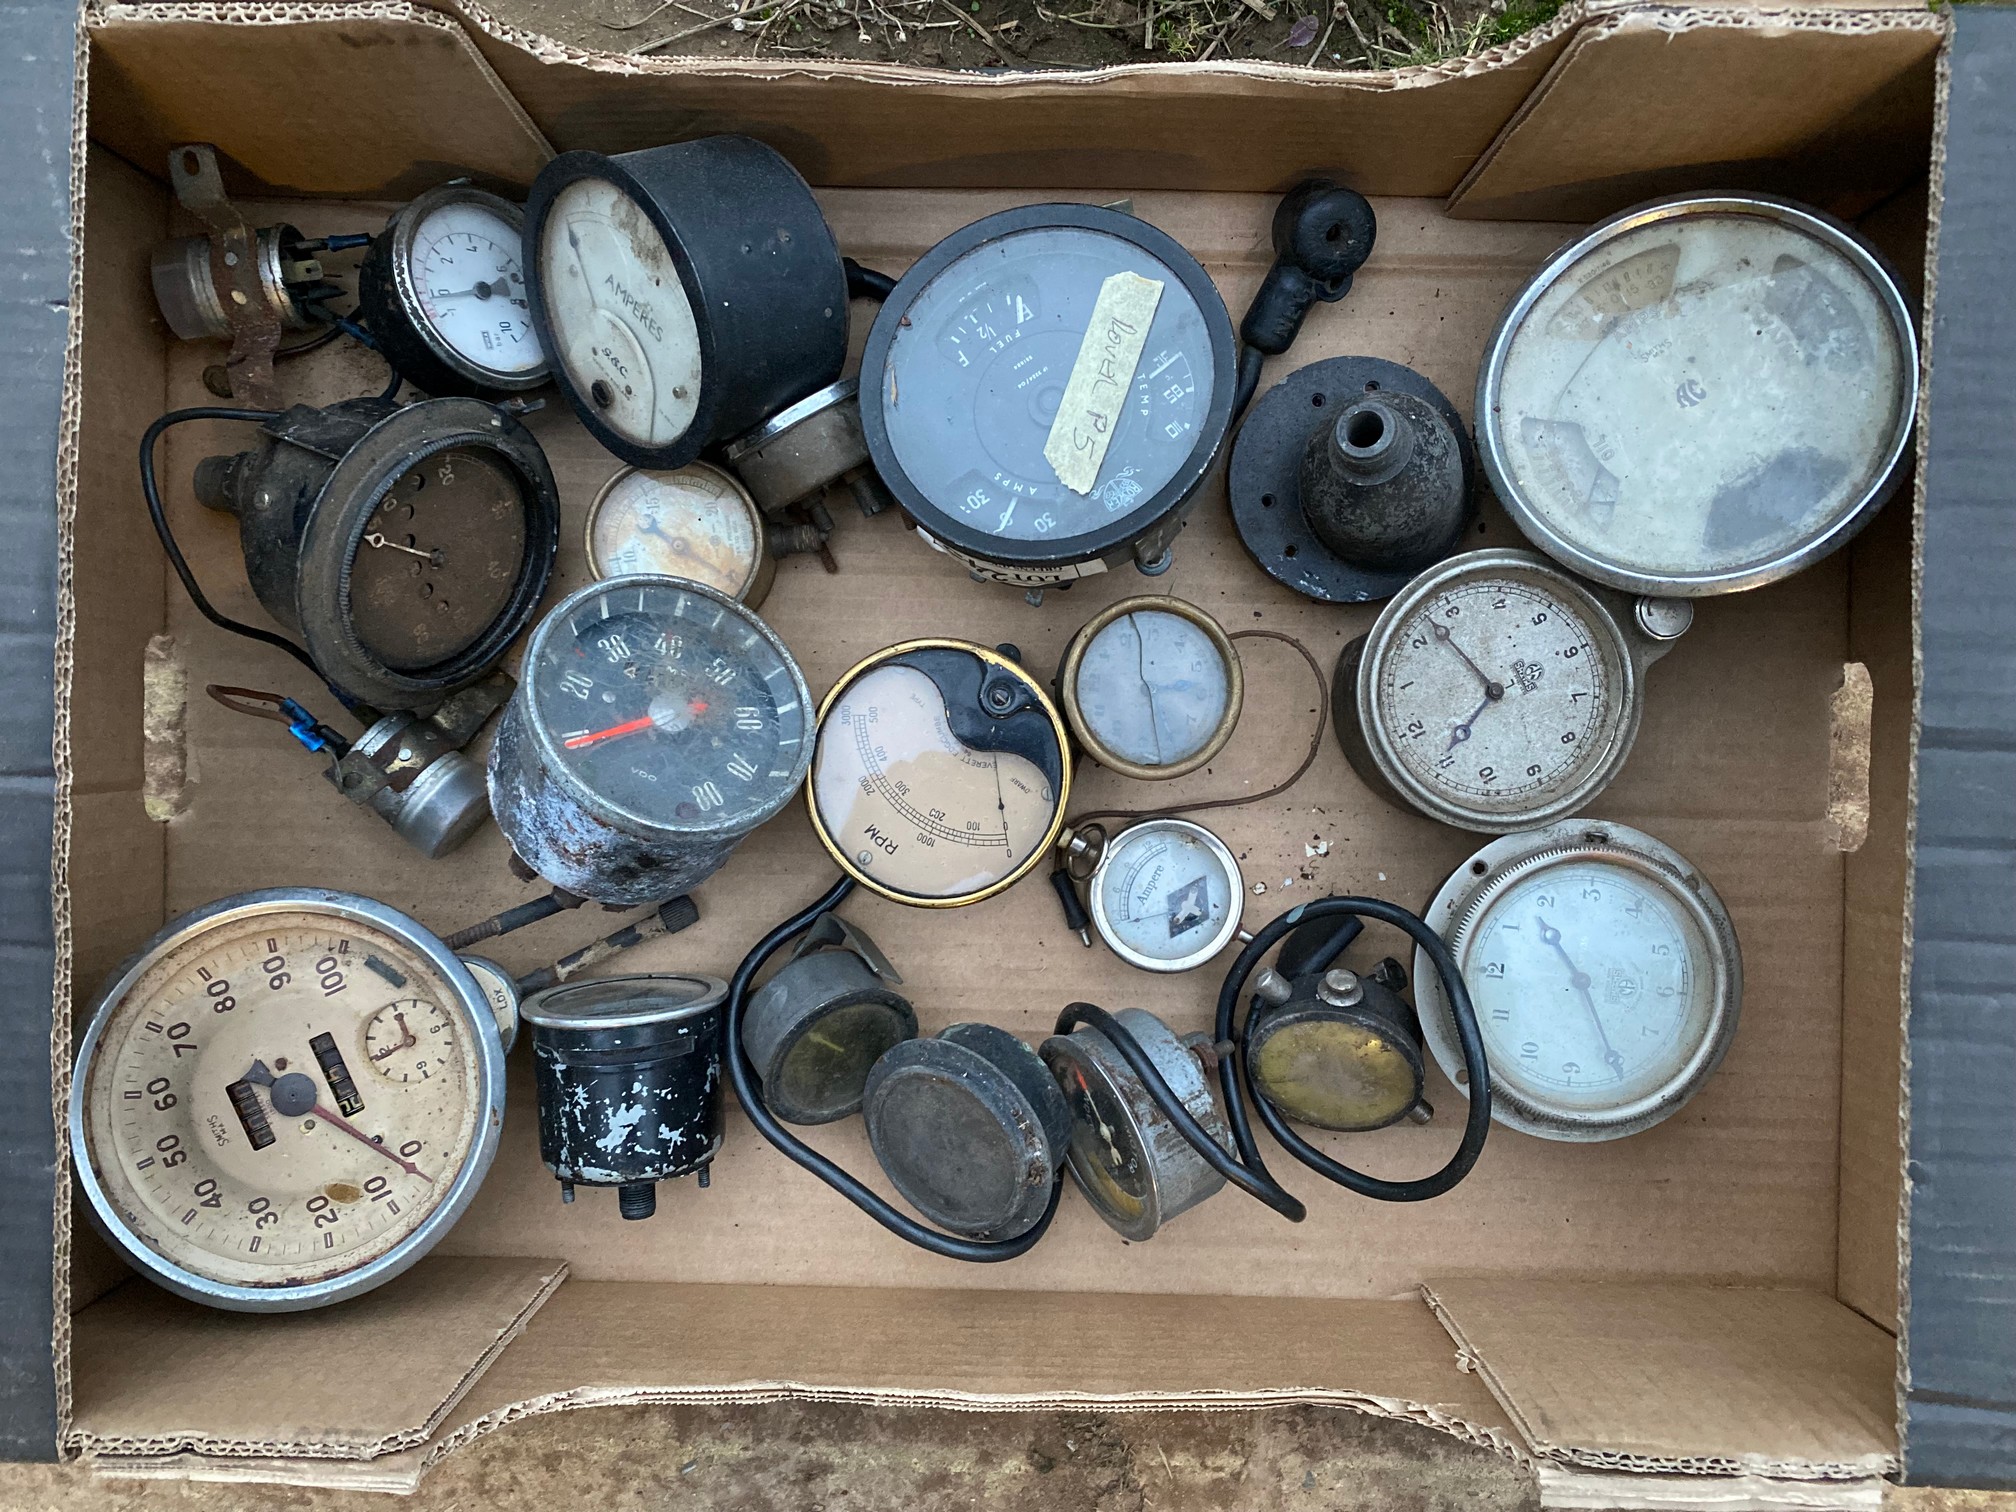 A box of assorted instruments and dials.